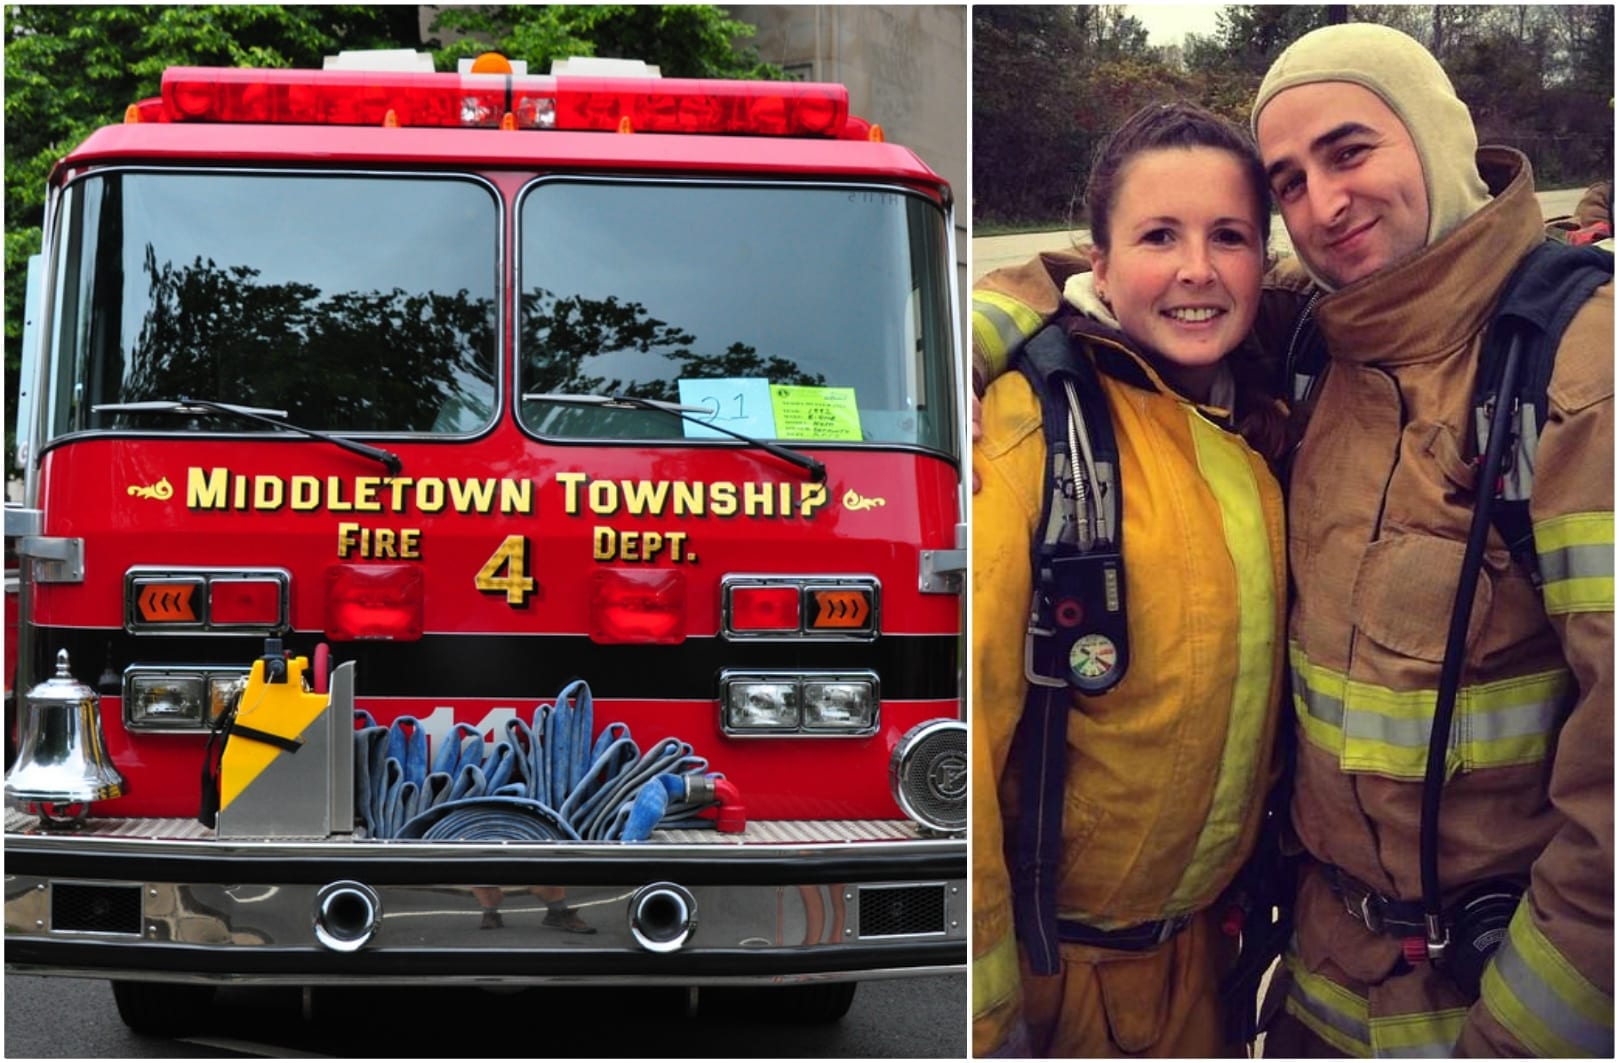 An investigation began, and in the end the local judges determined that the haircutting couple should have a price to pay as well. They were then suspended from their firefighter positions, with the Middletown Township fire department, placing both of them on “administrative leave.”